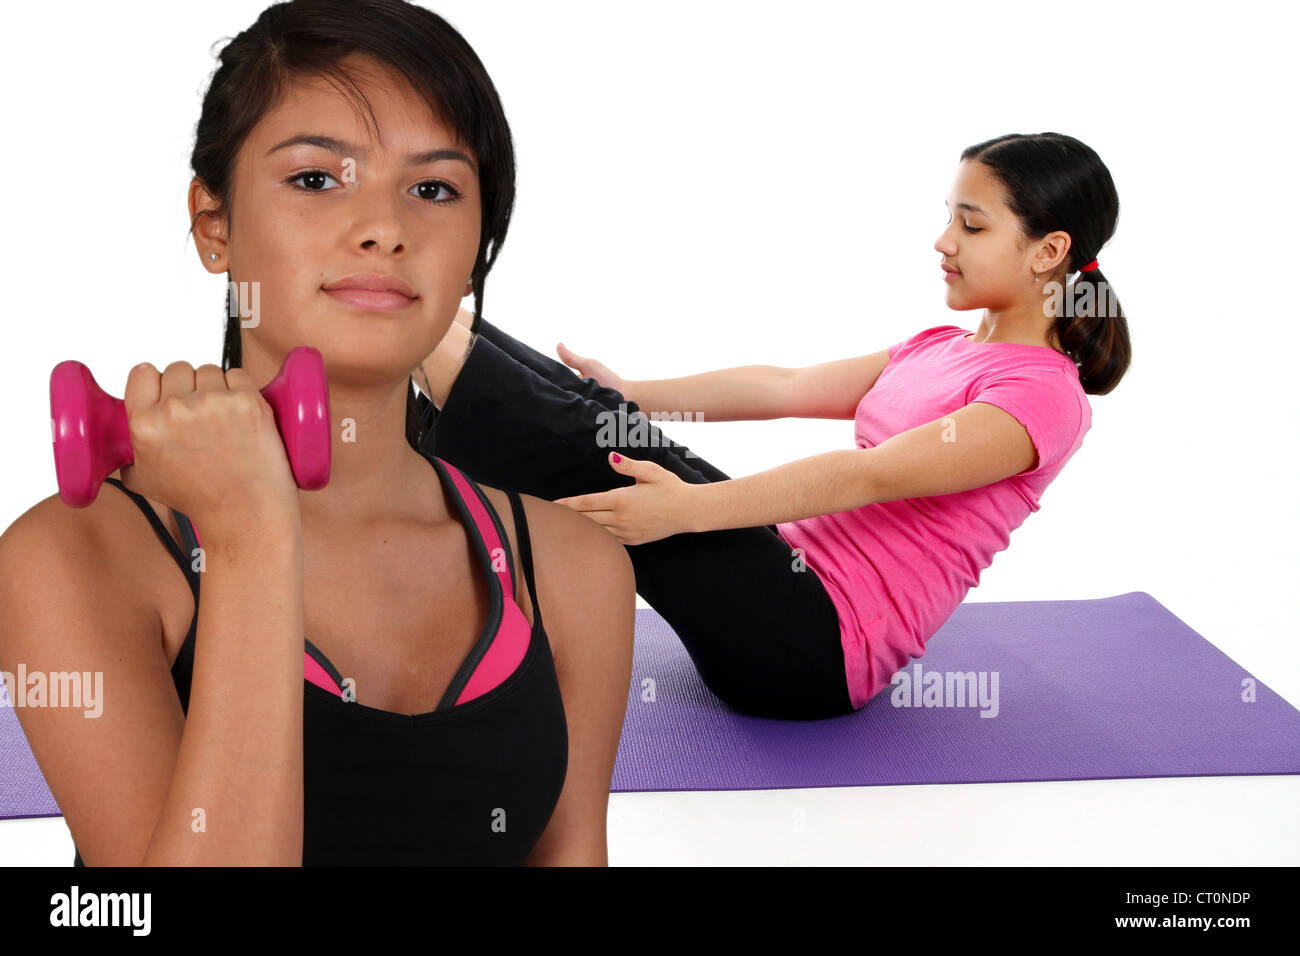 Girl Doing Yoga Pose in a Studio and another lifting weights Stock Photo